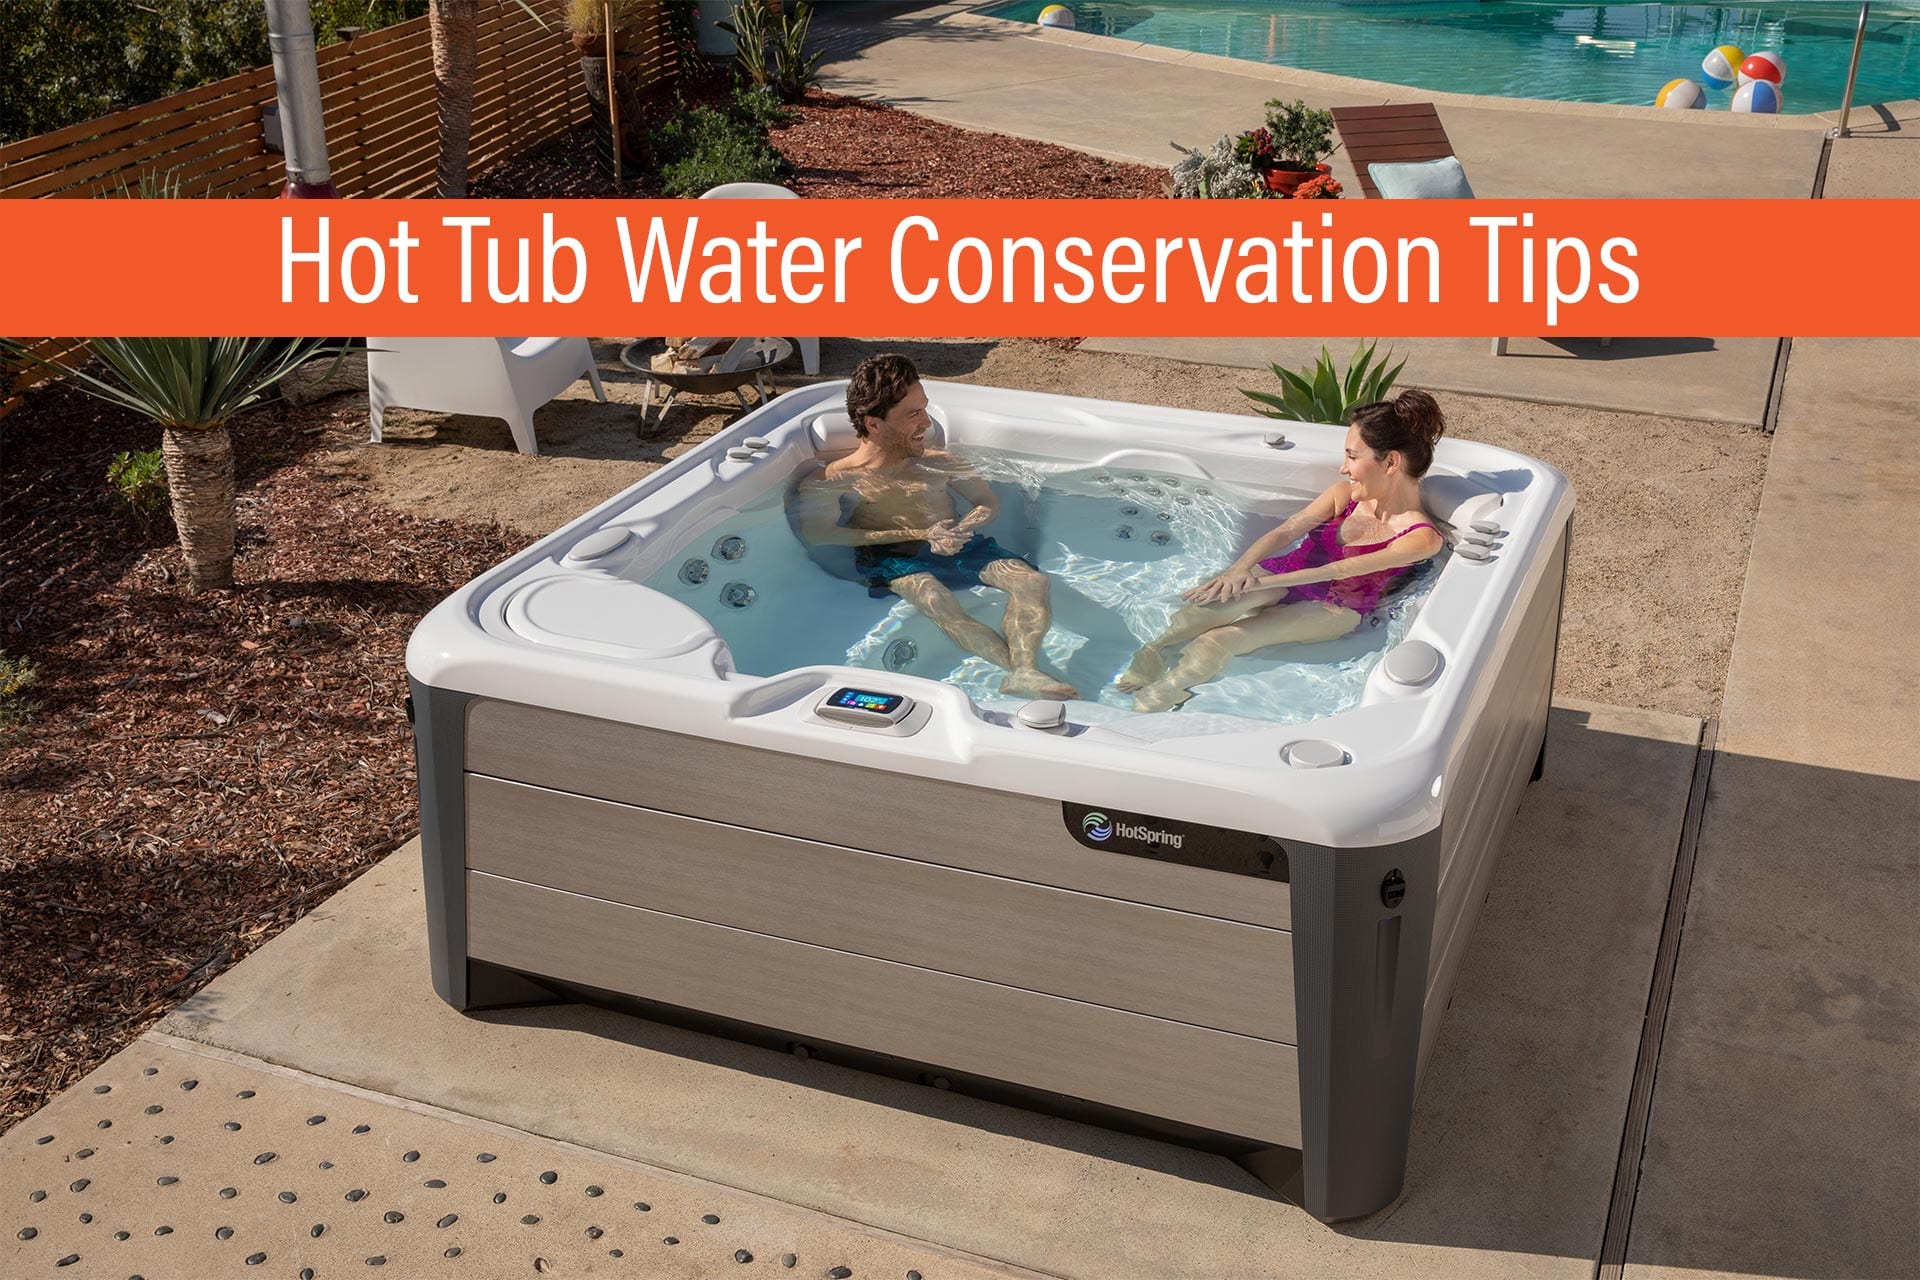 Hot Tub Water Conservation Tips